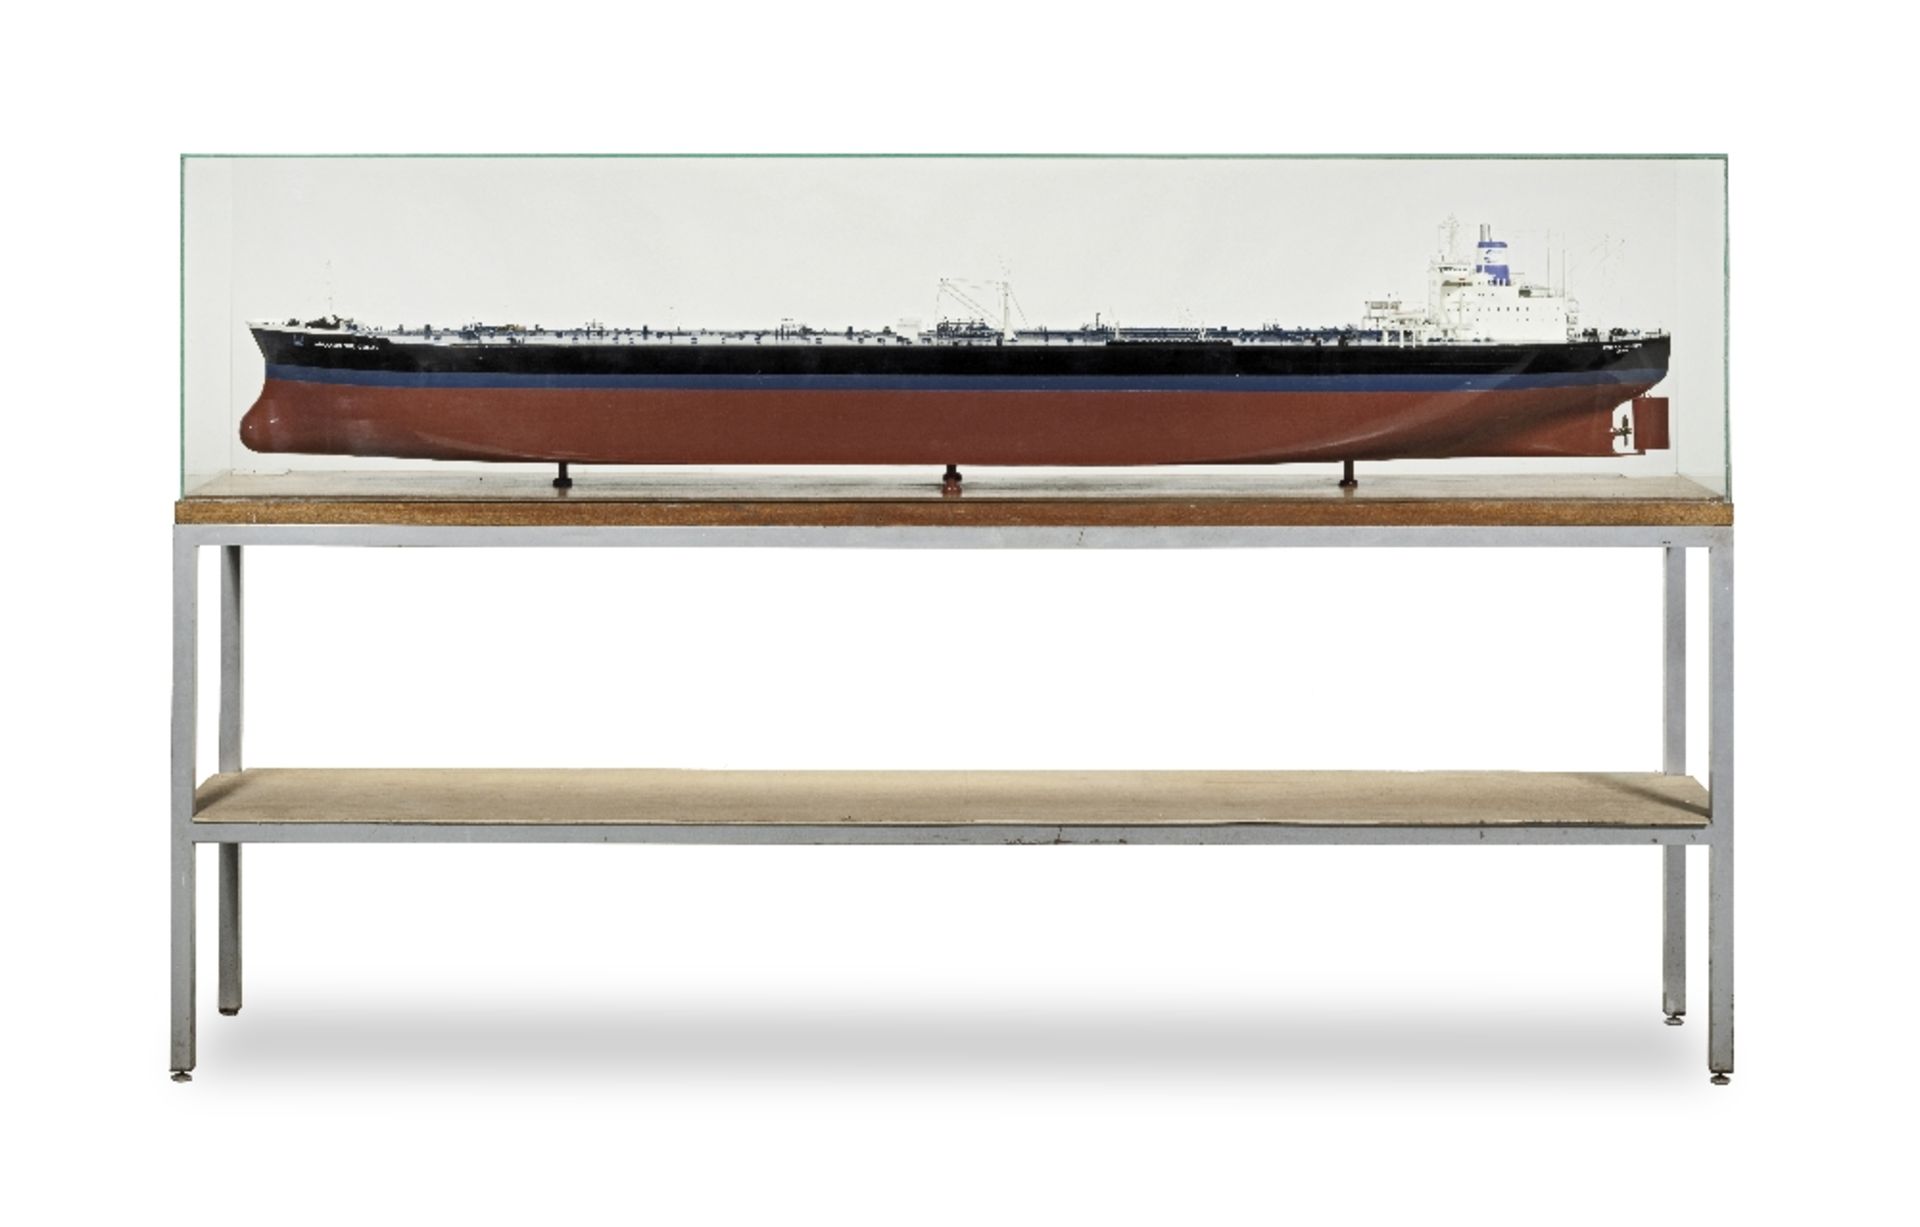 A Large Shipbuilder's Scale Model of the Tanker Halcyon the Great, Circa 1970, the model 87 3/8i...